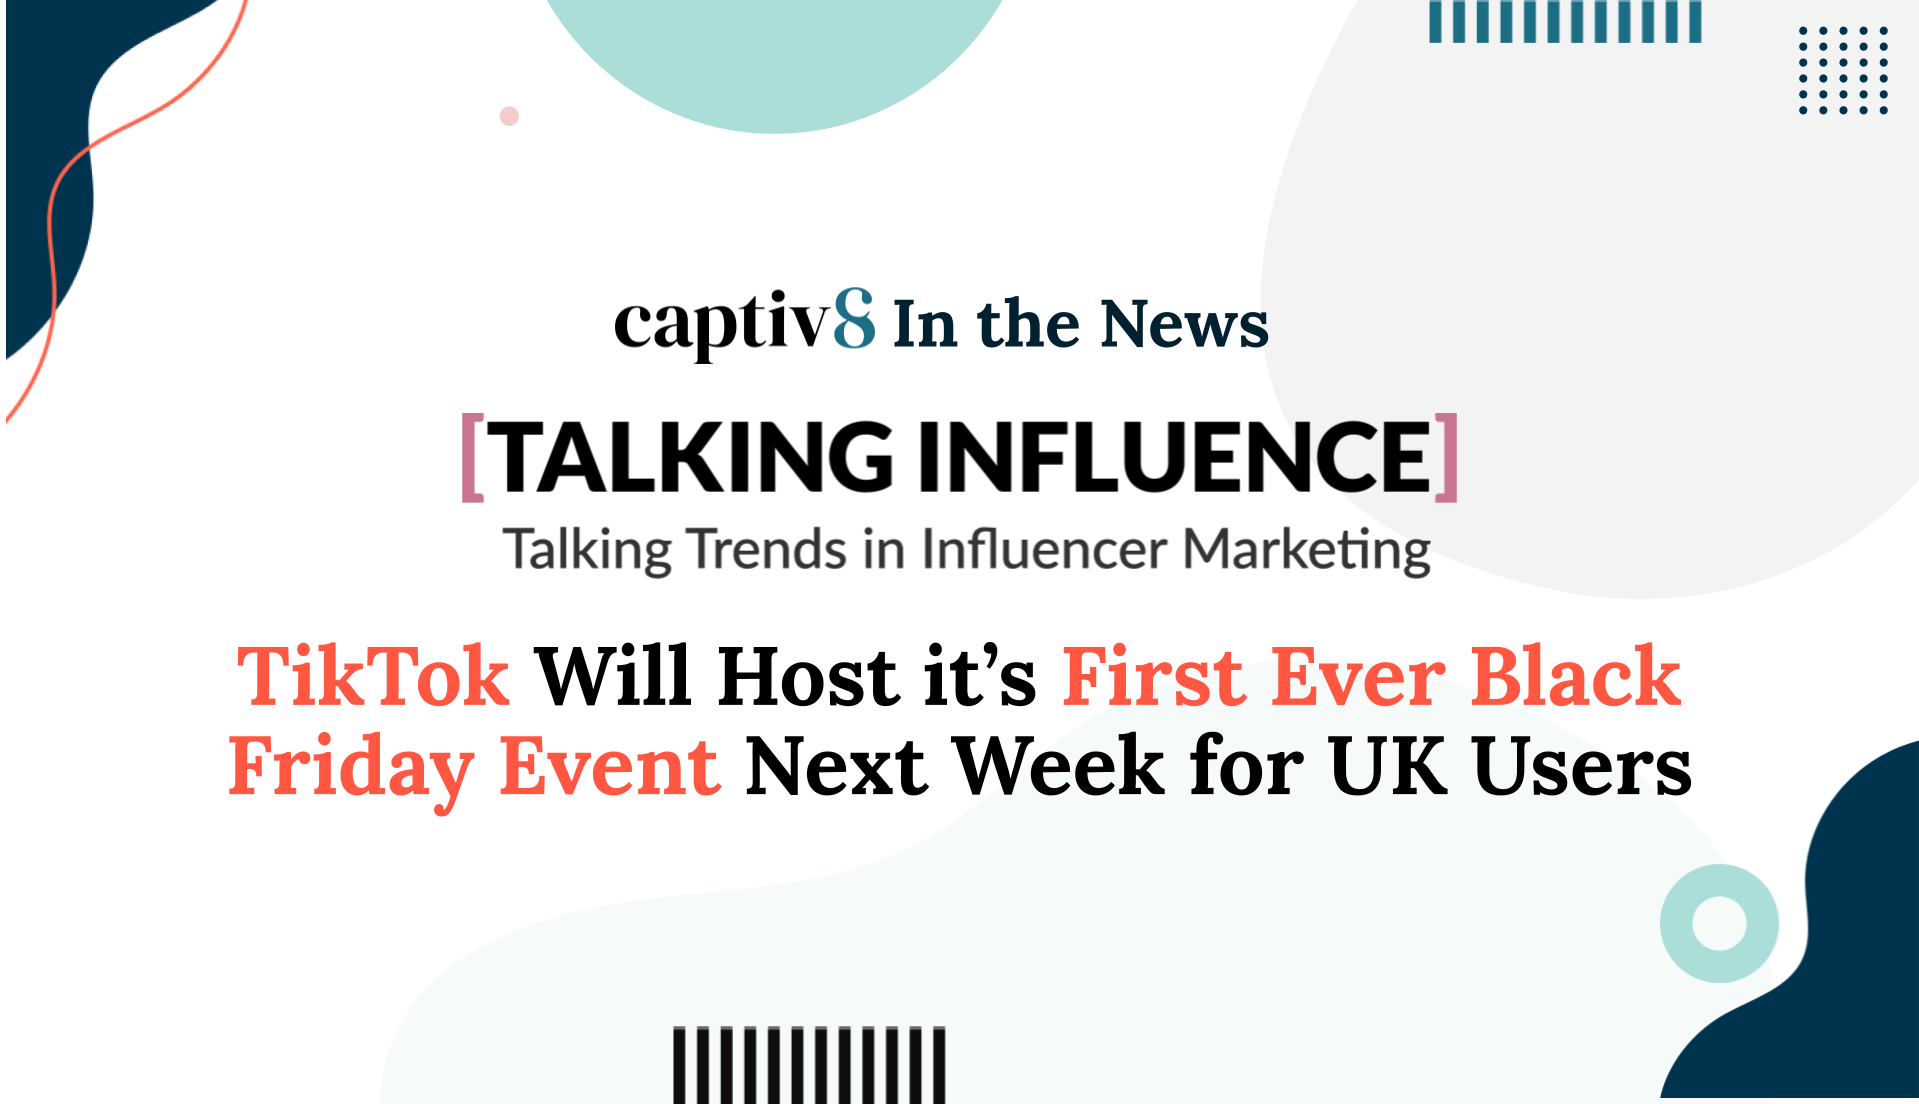 and Influencer Business Trends Newsletter February 18